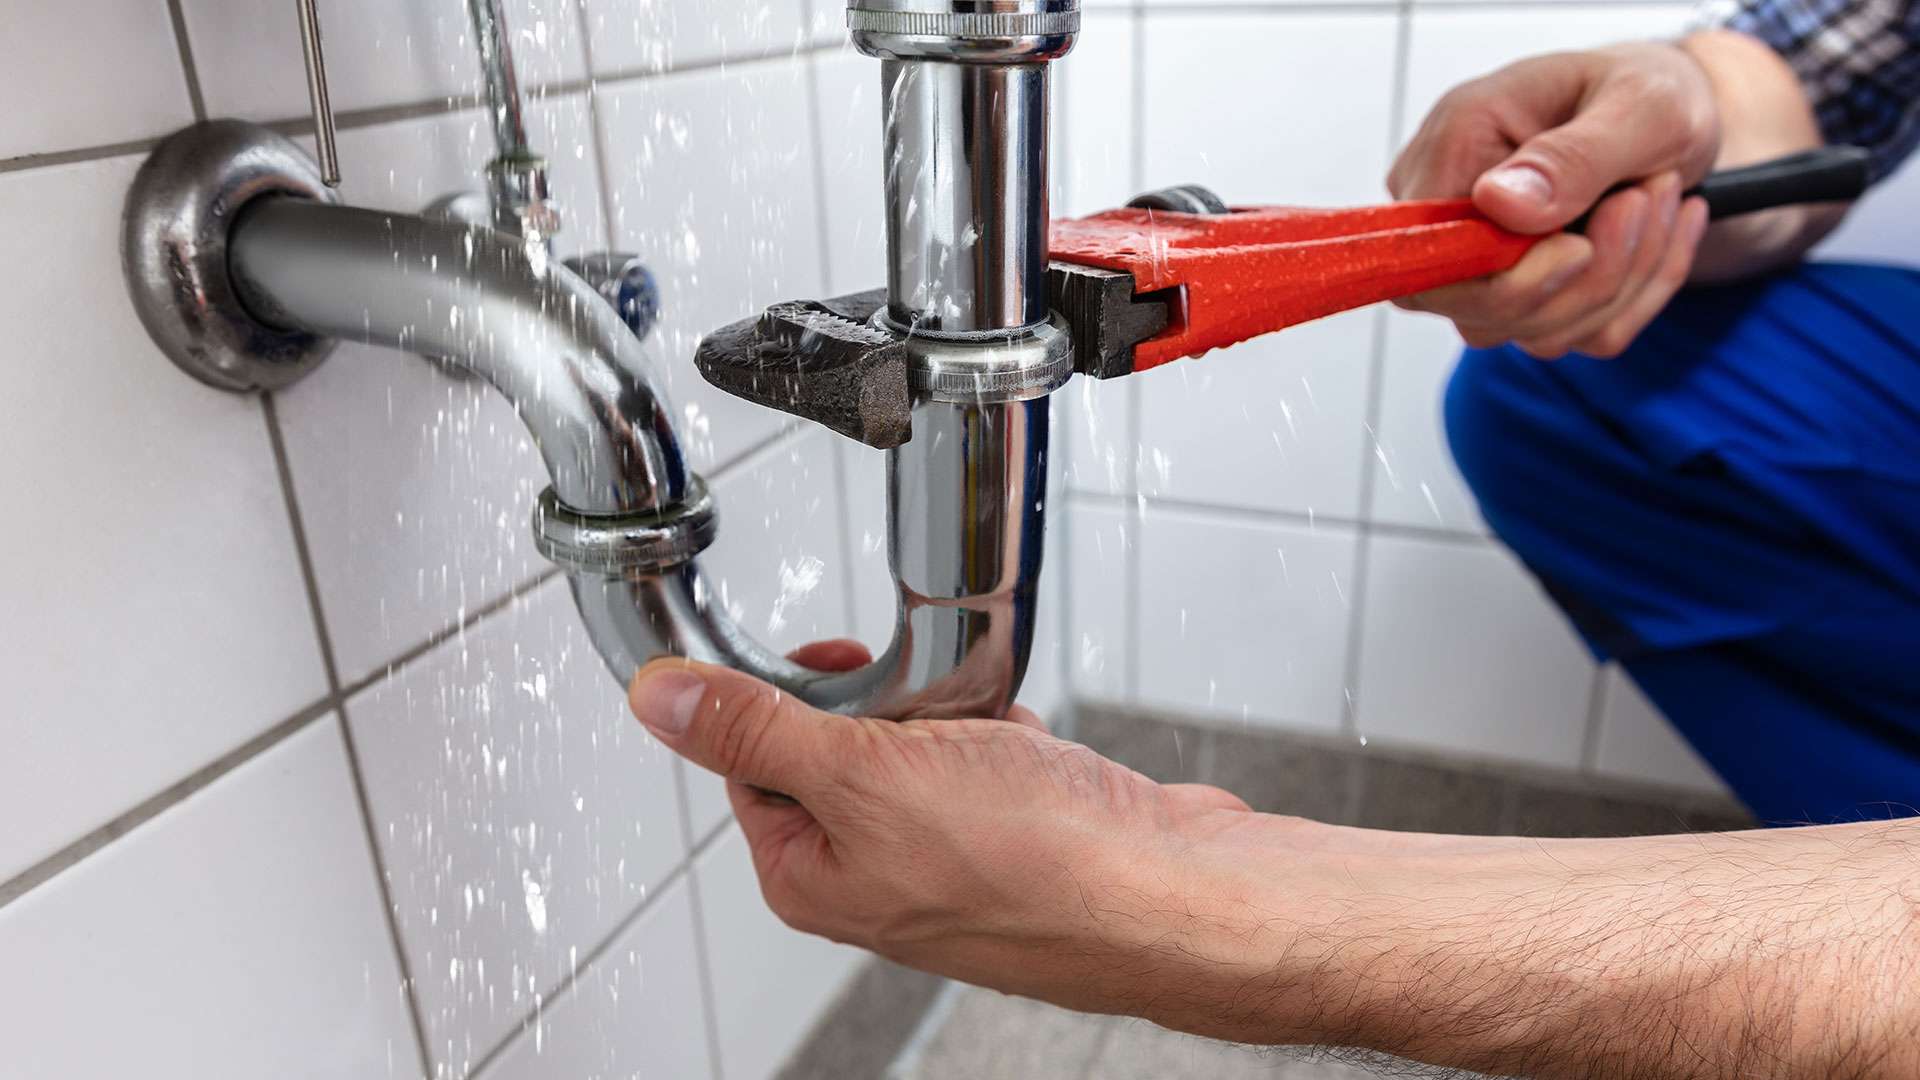 Plumbing Tips | Pro-Check Home Inspections
